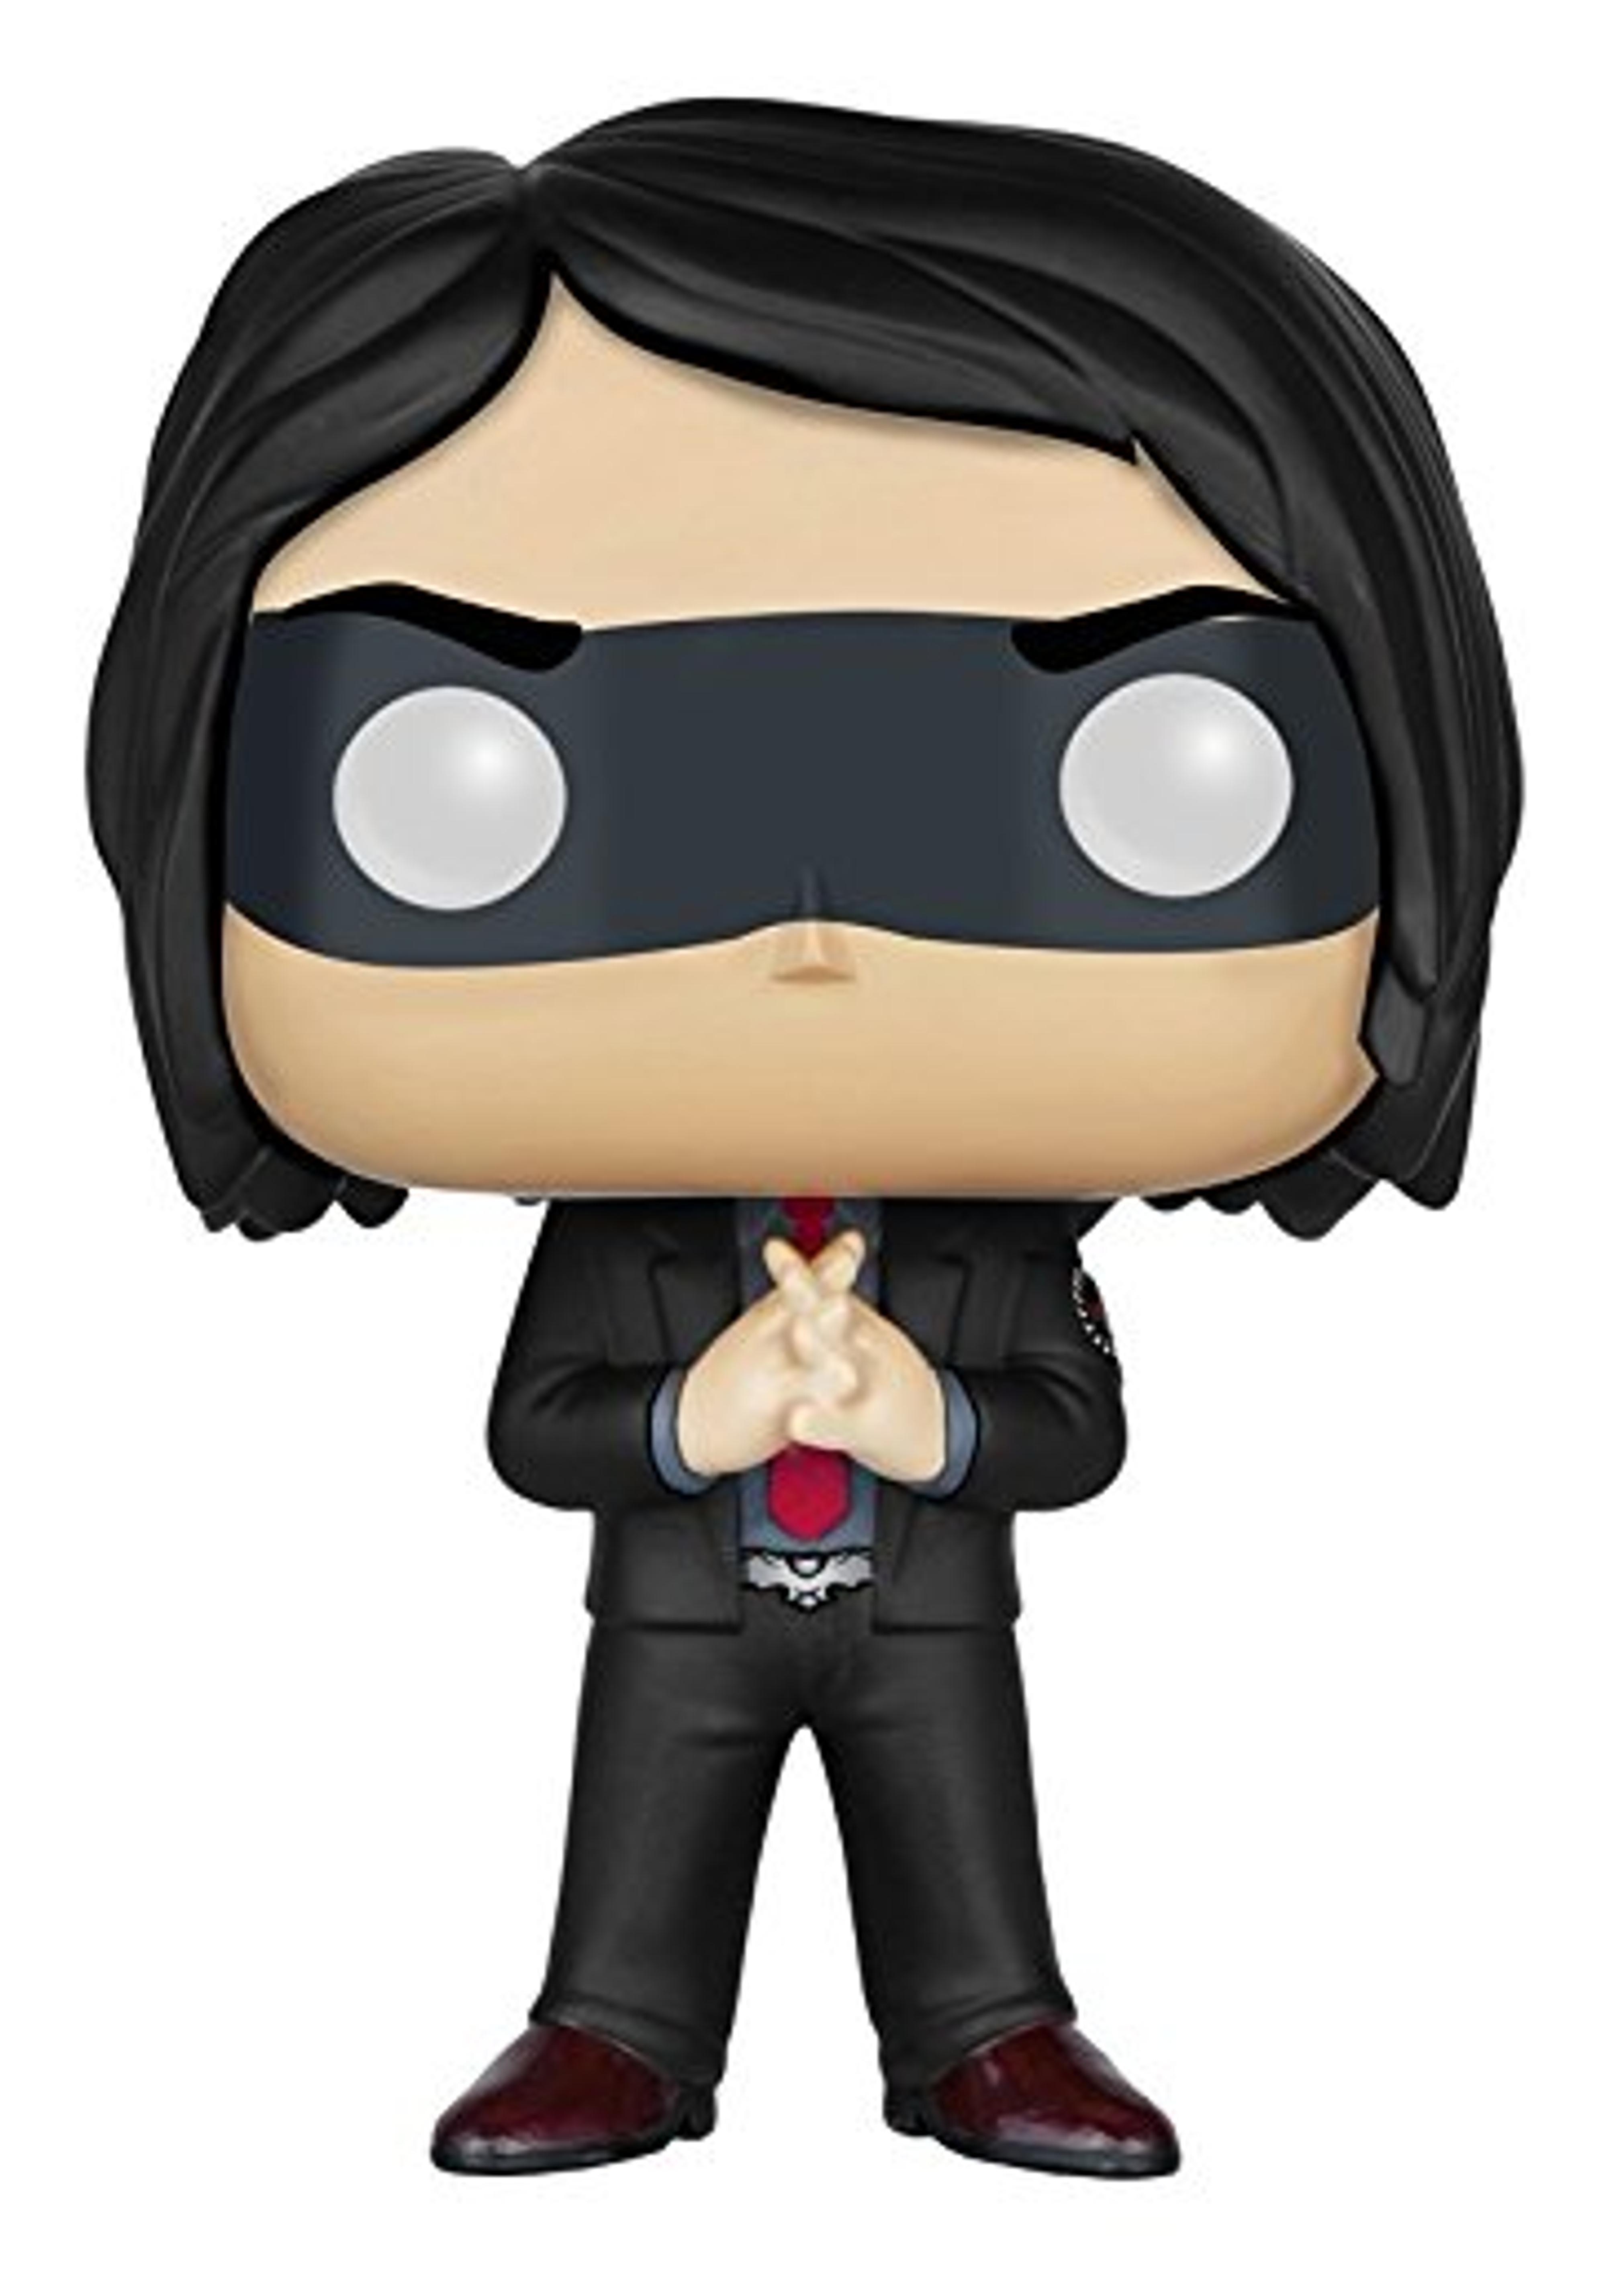 Funko POP Rocks: My Chemical Romance - Red Tie Gerard Way Action Figure,Multi-colored,3.75 inches